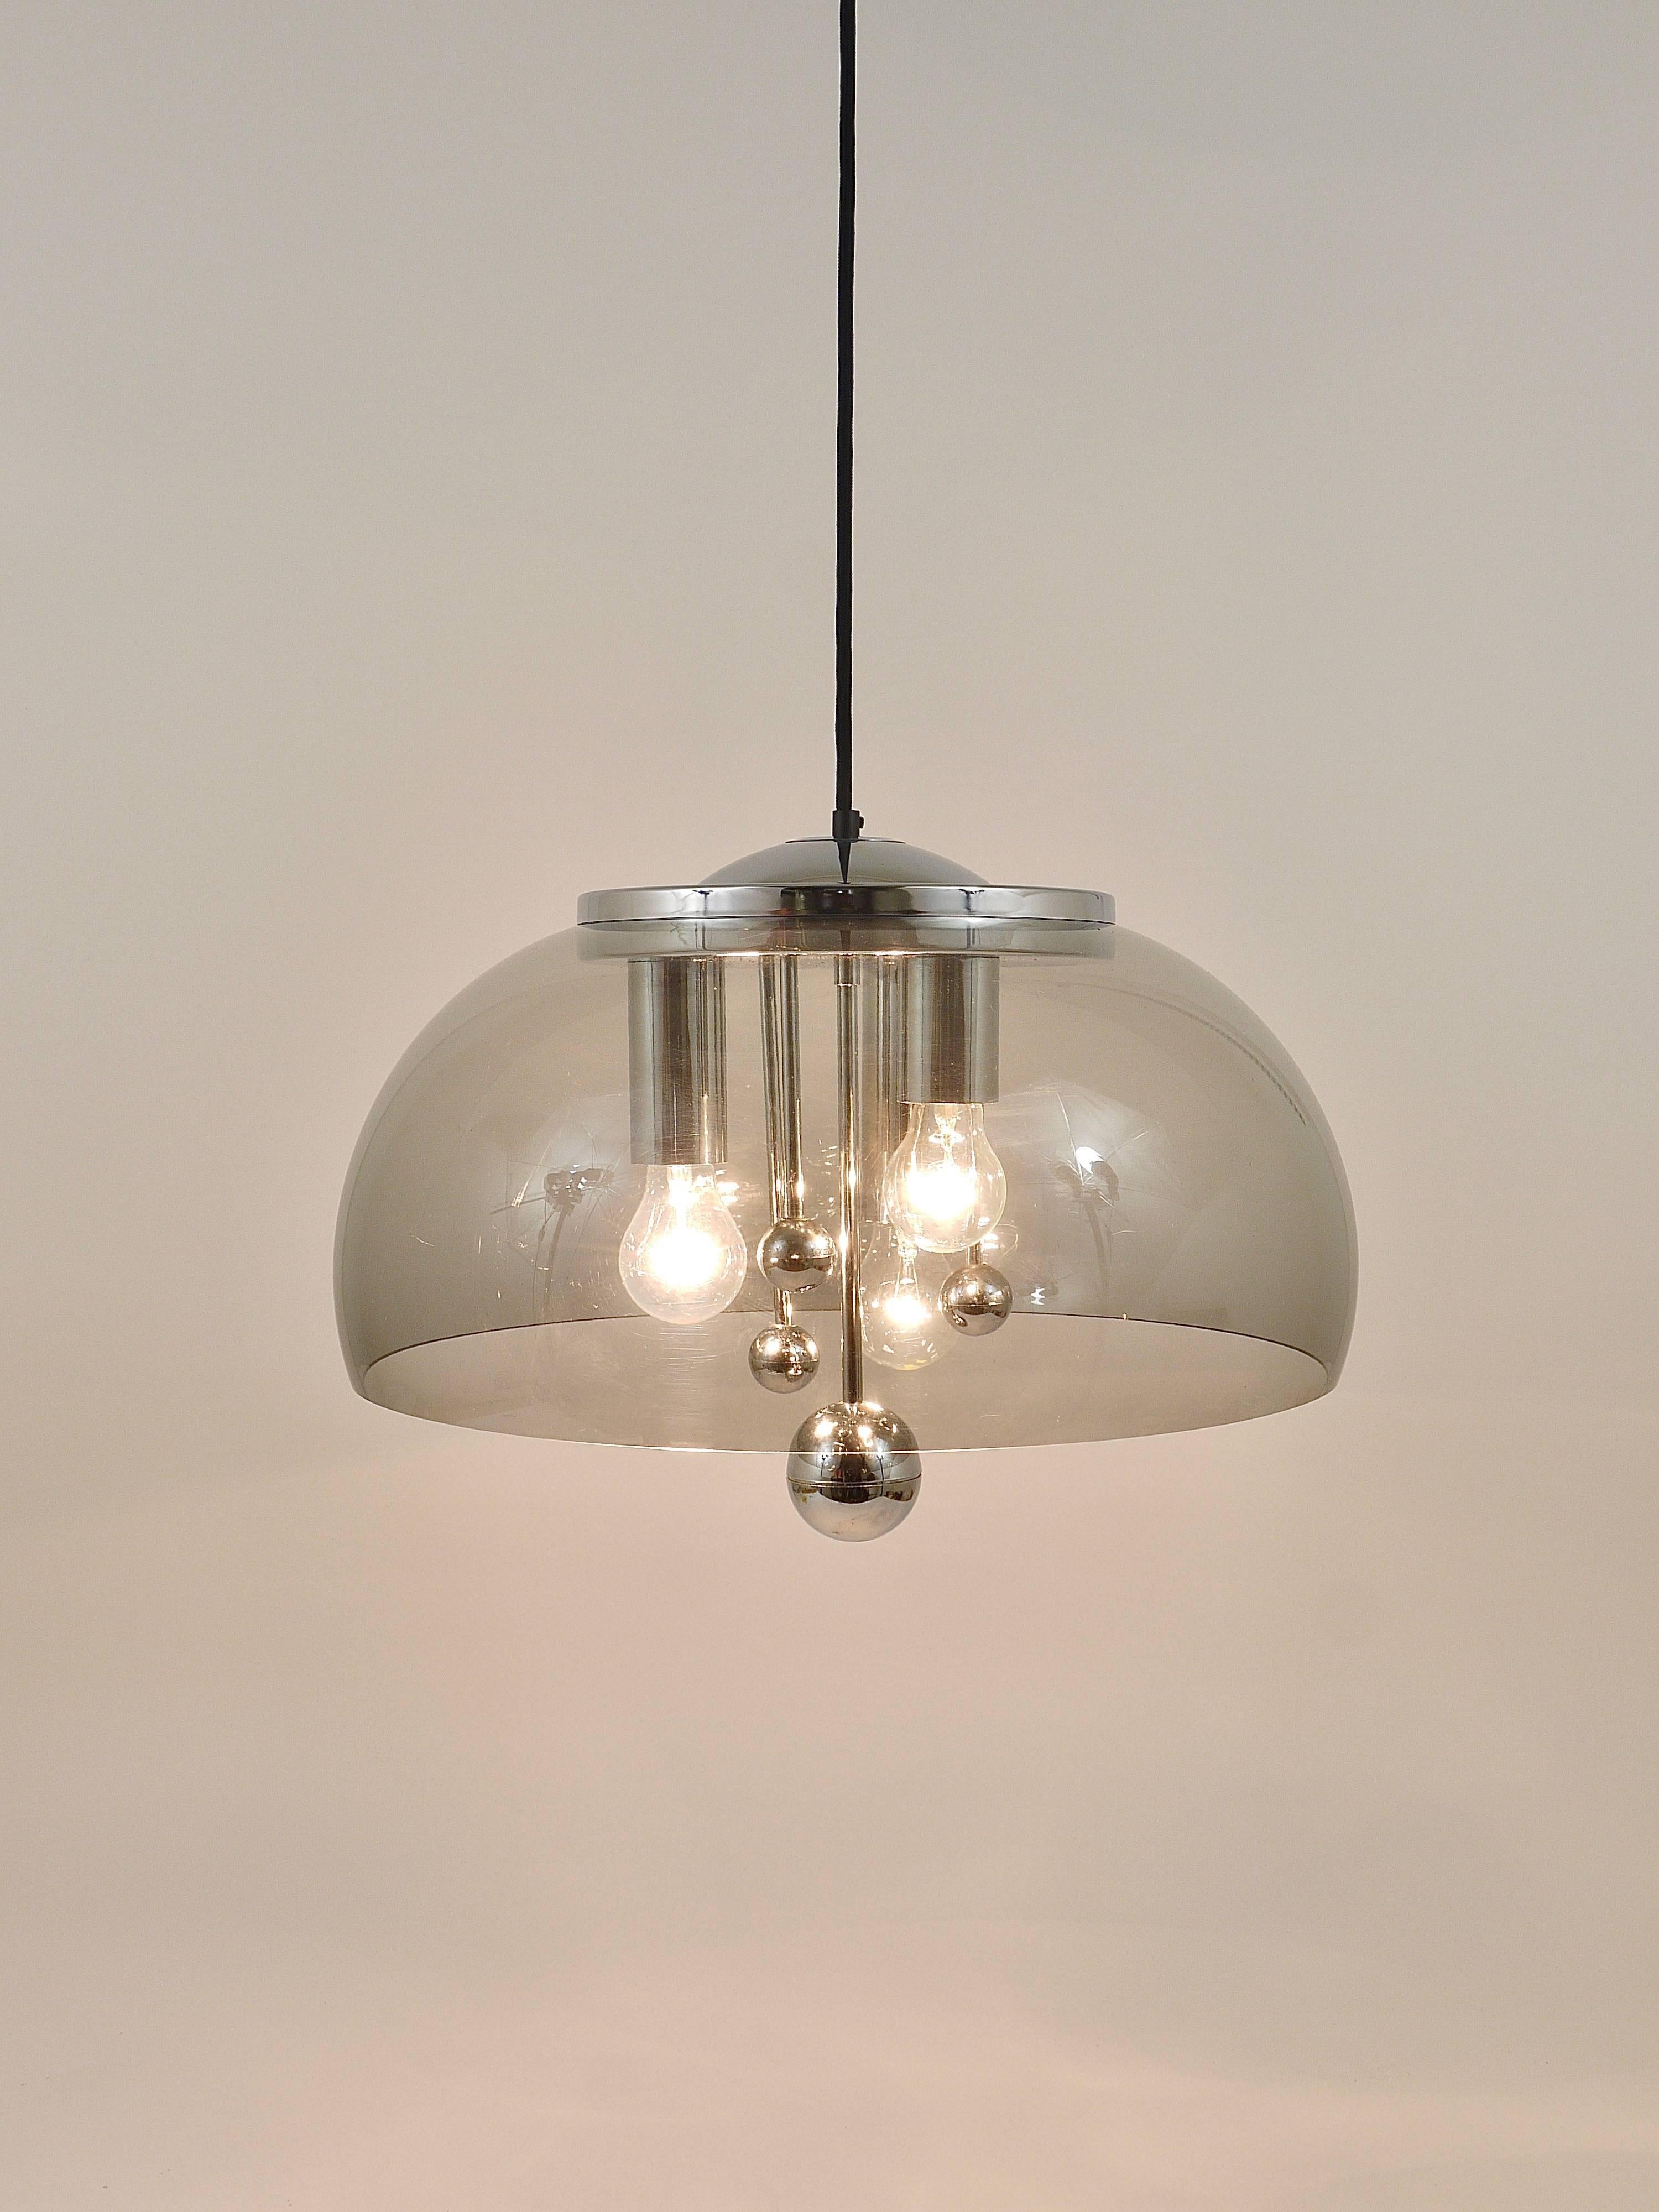 Midcentury Space Age Globe Pendant Lamp with Chromed Spheres, Germany, 1970s For Sale 12